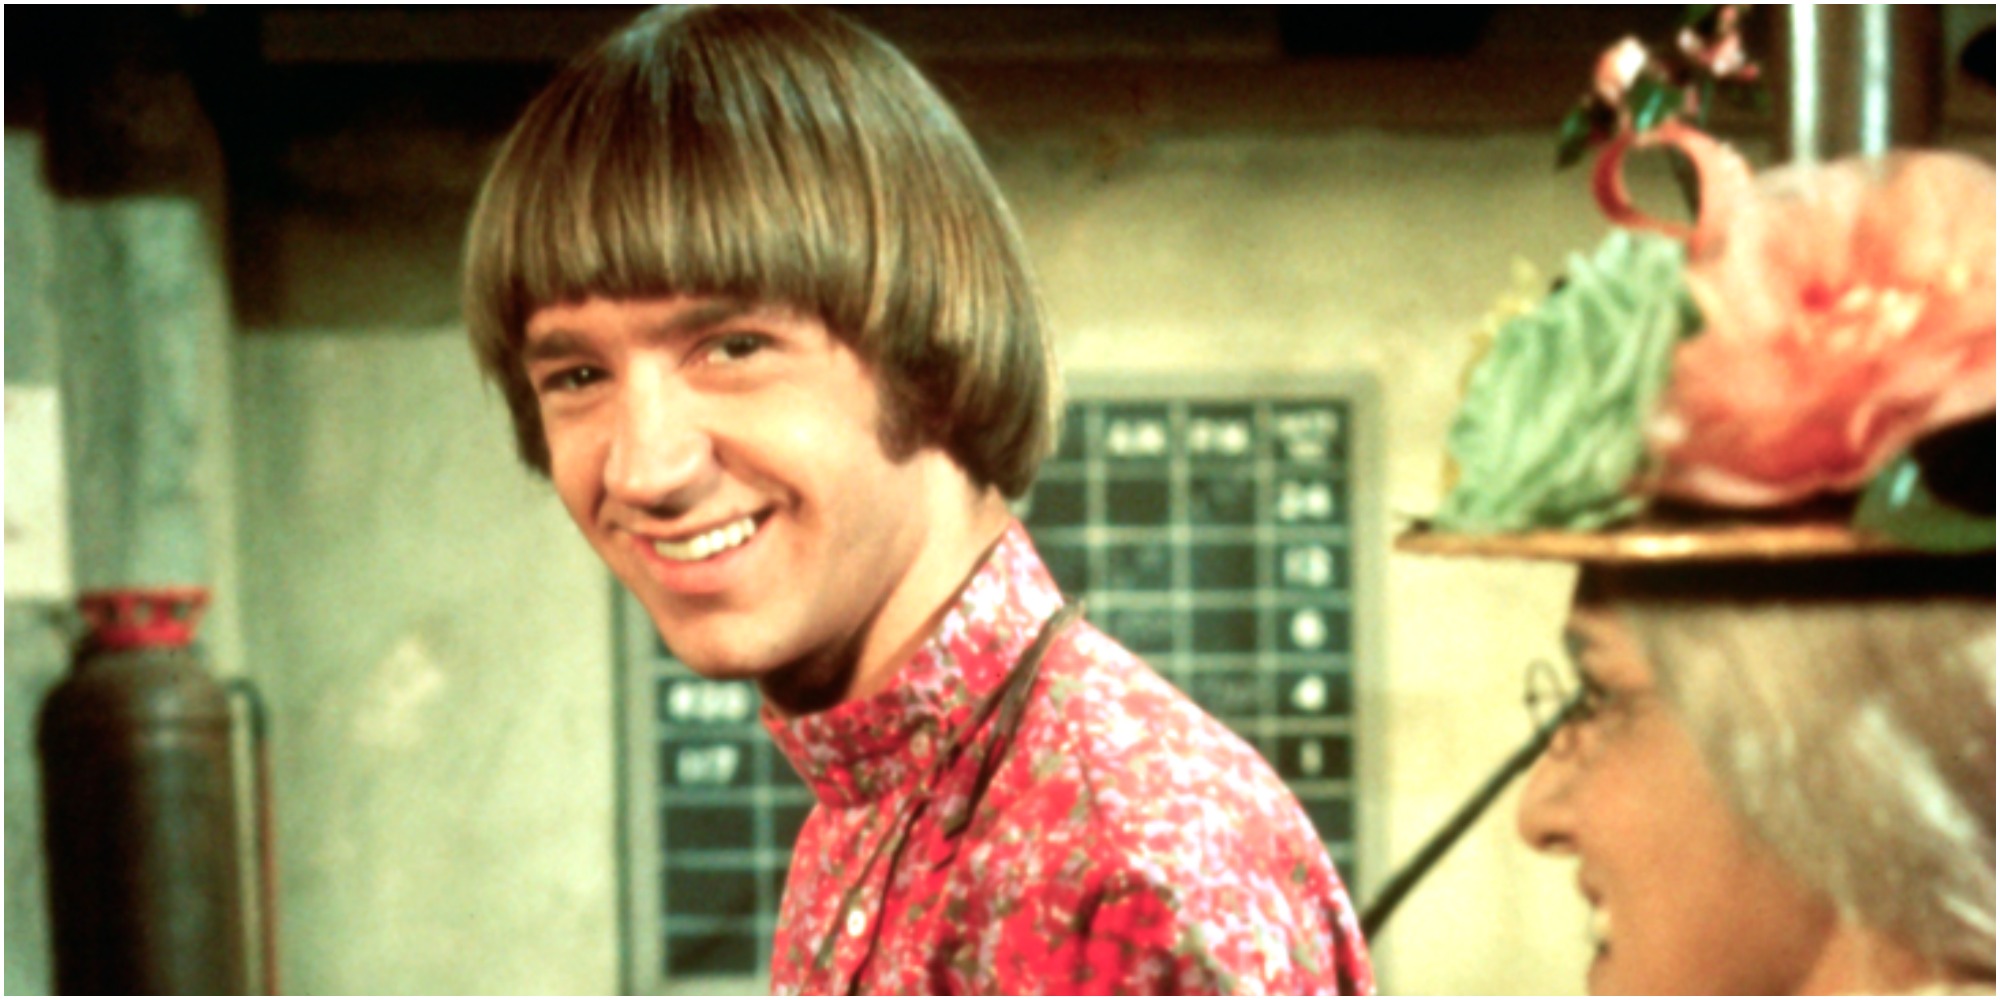 Peter Tork on the set of The Monkees.